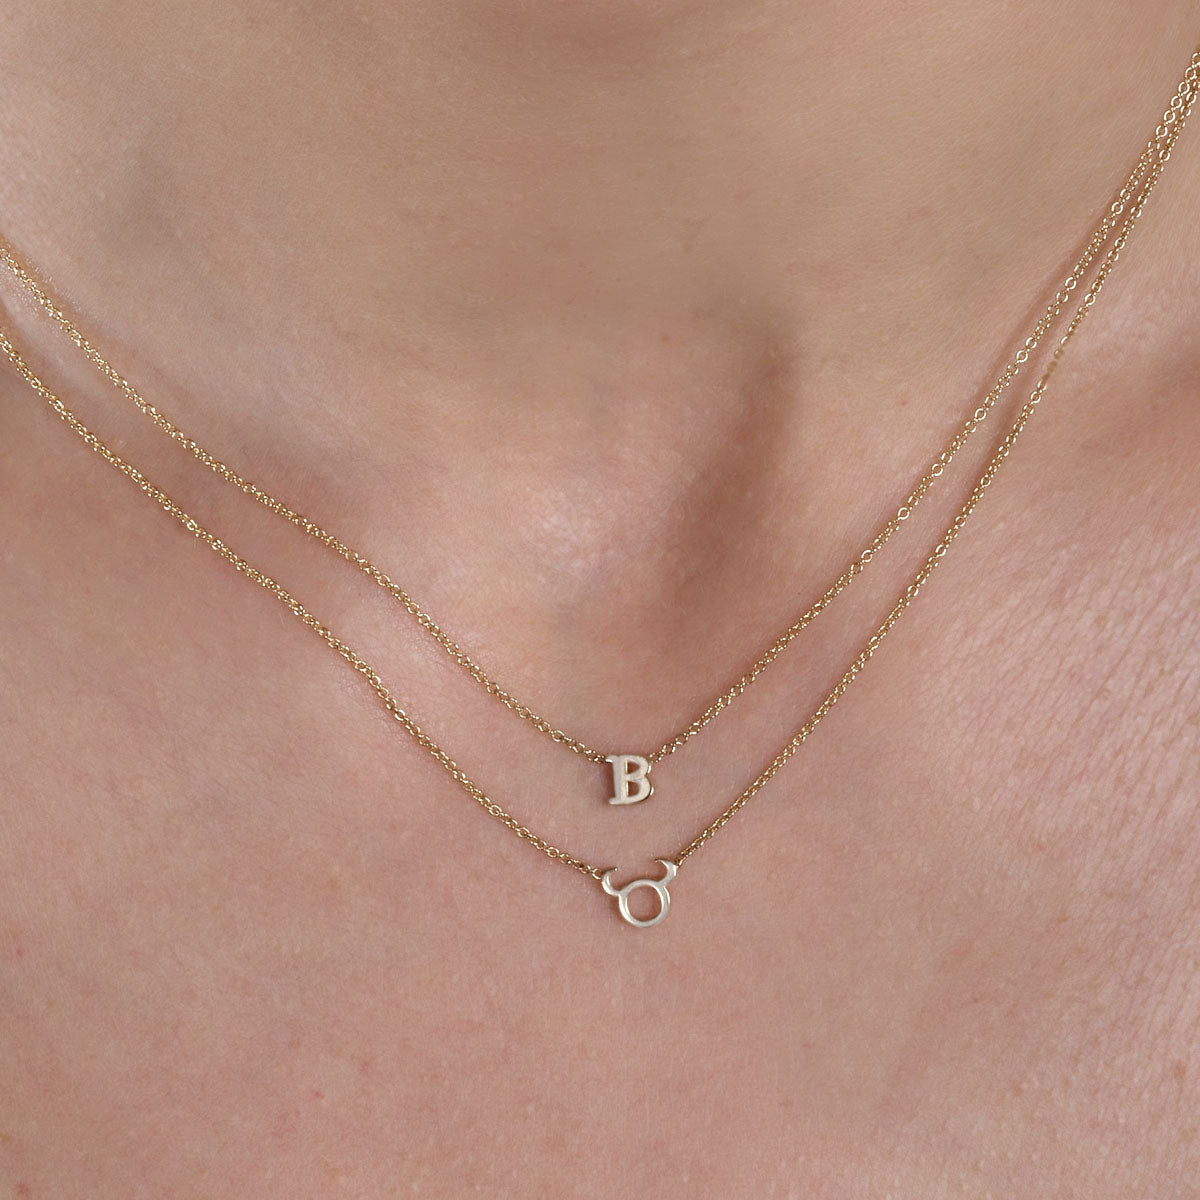 Gold initial necklace and Taurus zodiac pendant - layered personalized jewelry